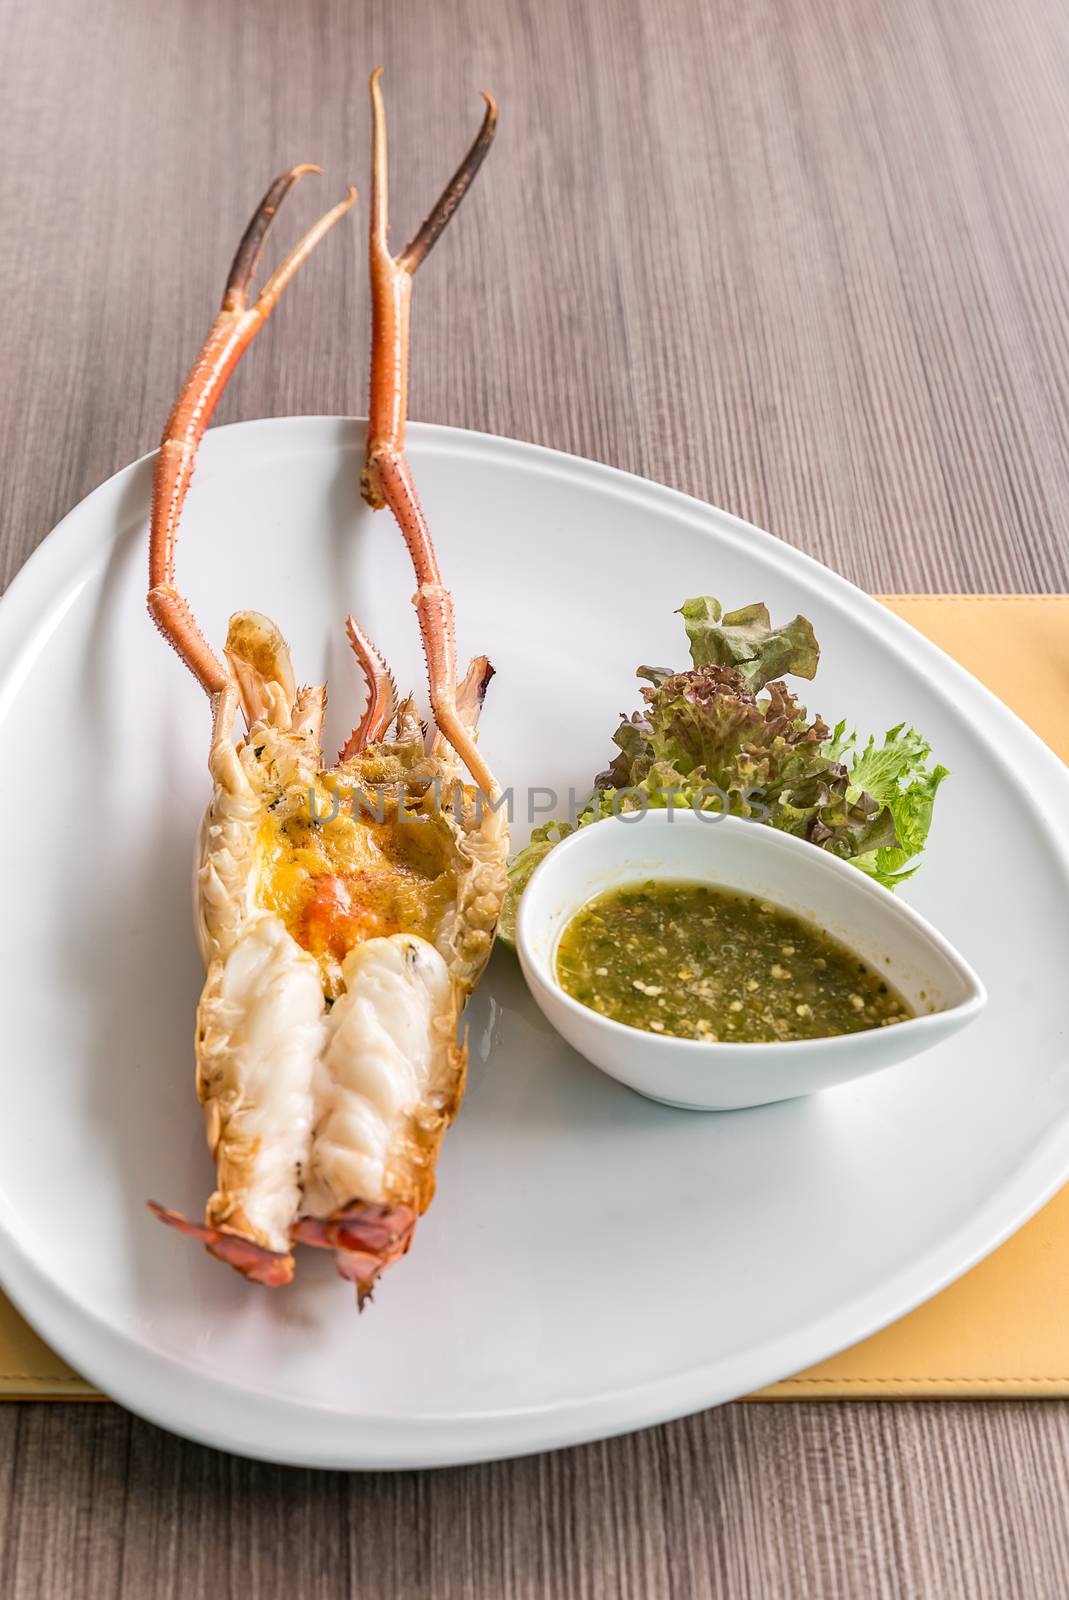 Grilled mighty tiger river prawn with spicy sauce and lettuce